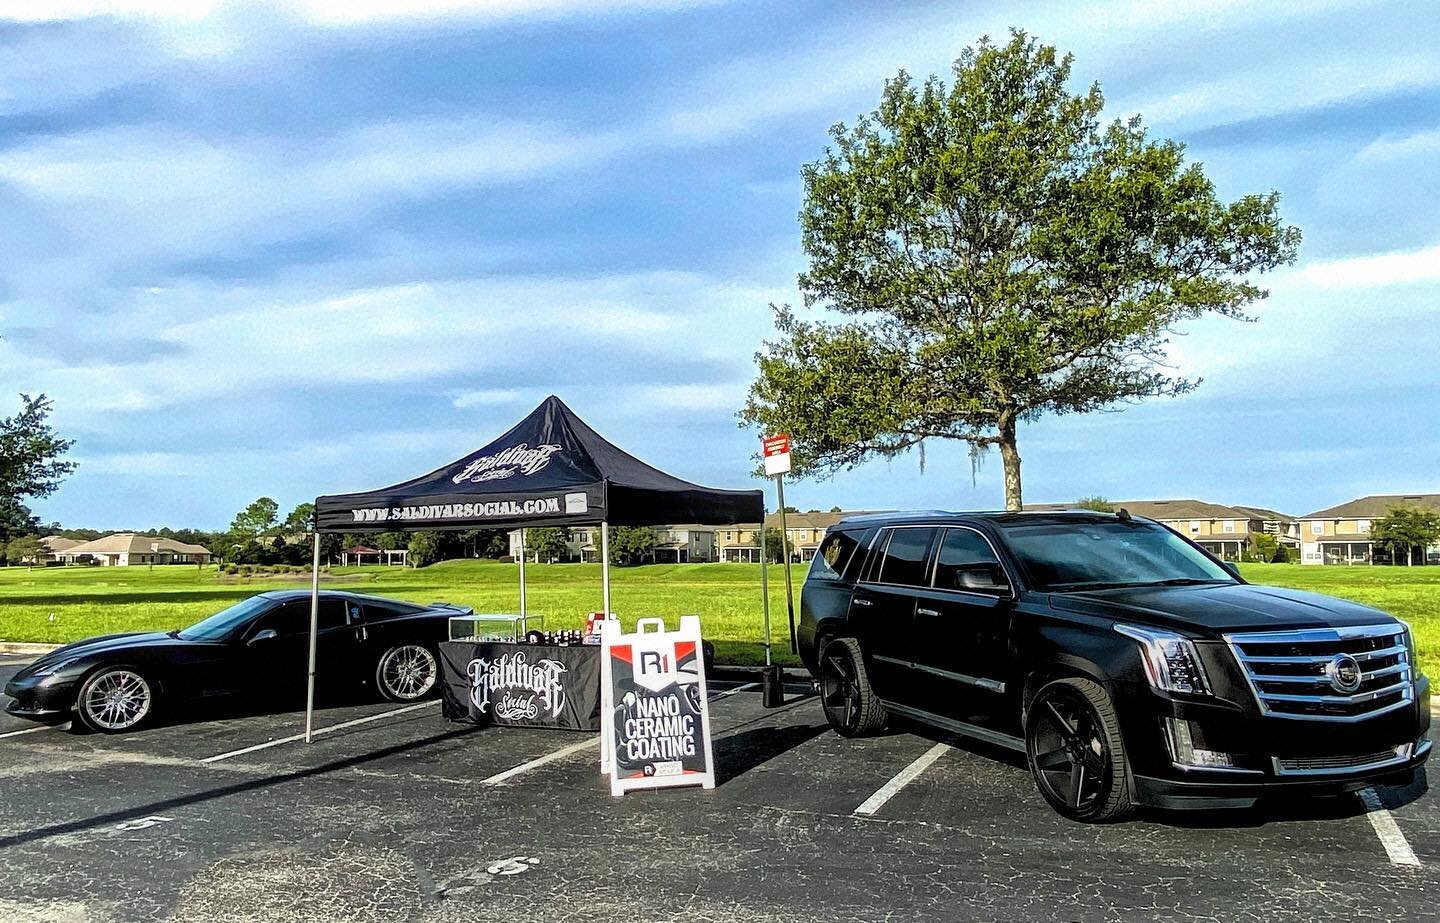 @saldivarsocial_autostyling here @carsandcoffeefleming your North Florida R1 @r1coatings Approved Applicator ~When you want to &ldquo;ROCK WITH THE BEST&rdquo;, Saldivar Social holds 5 Autostyling Certifications, trained by the same facility that tra